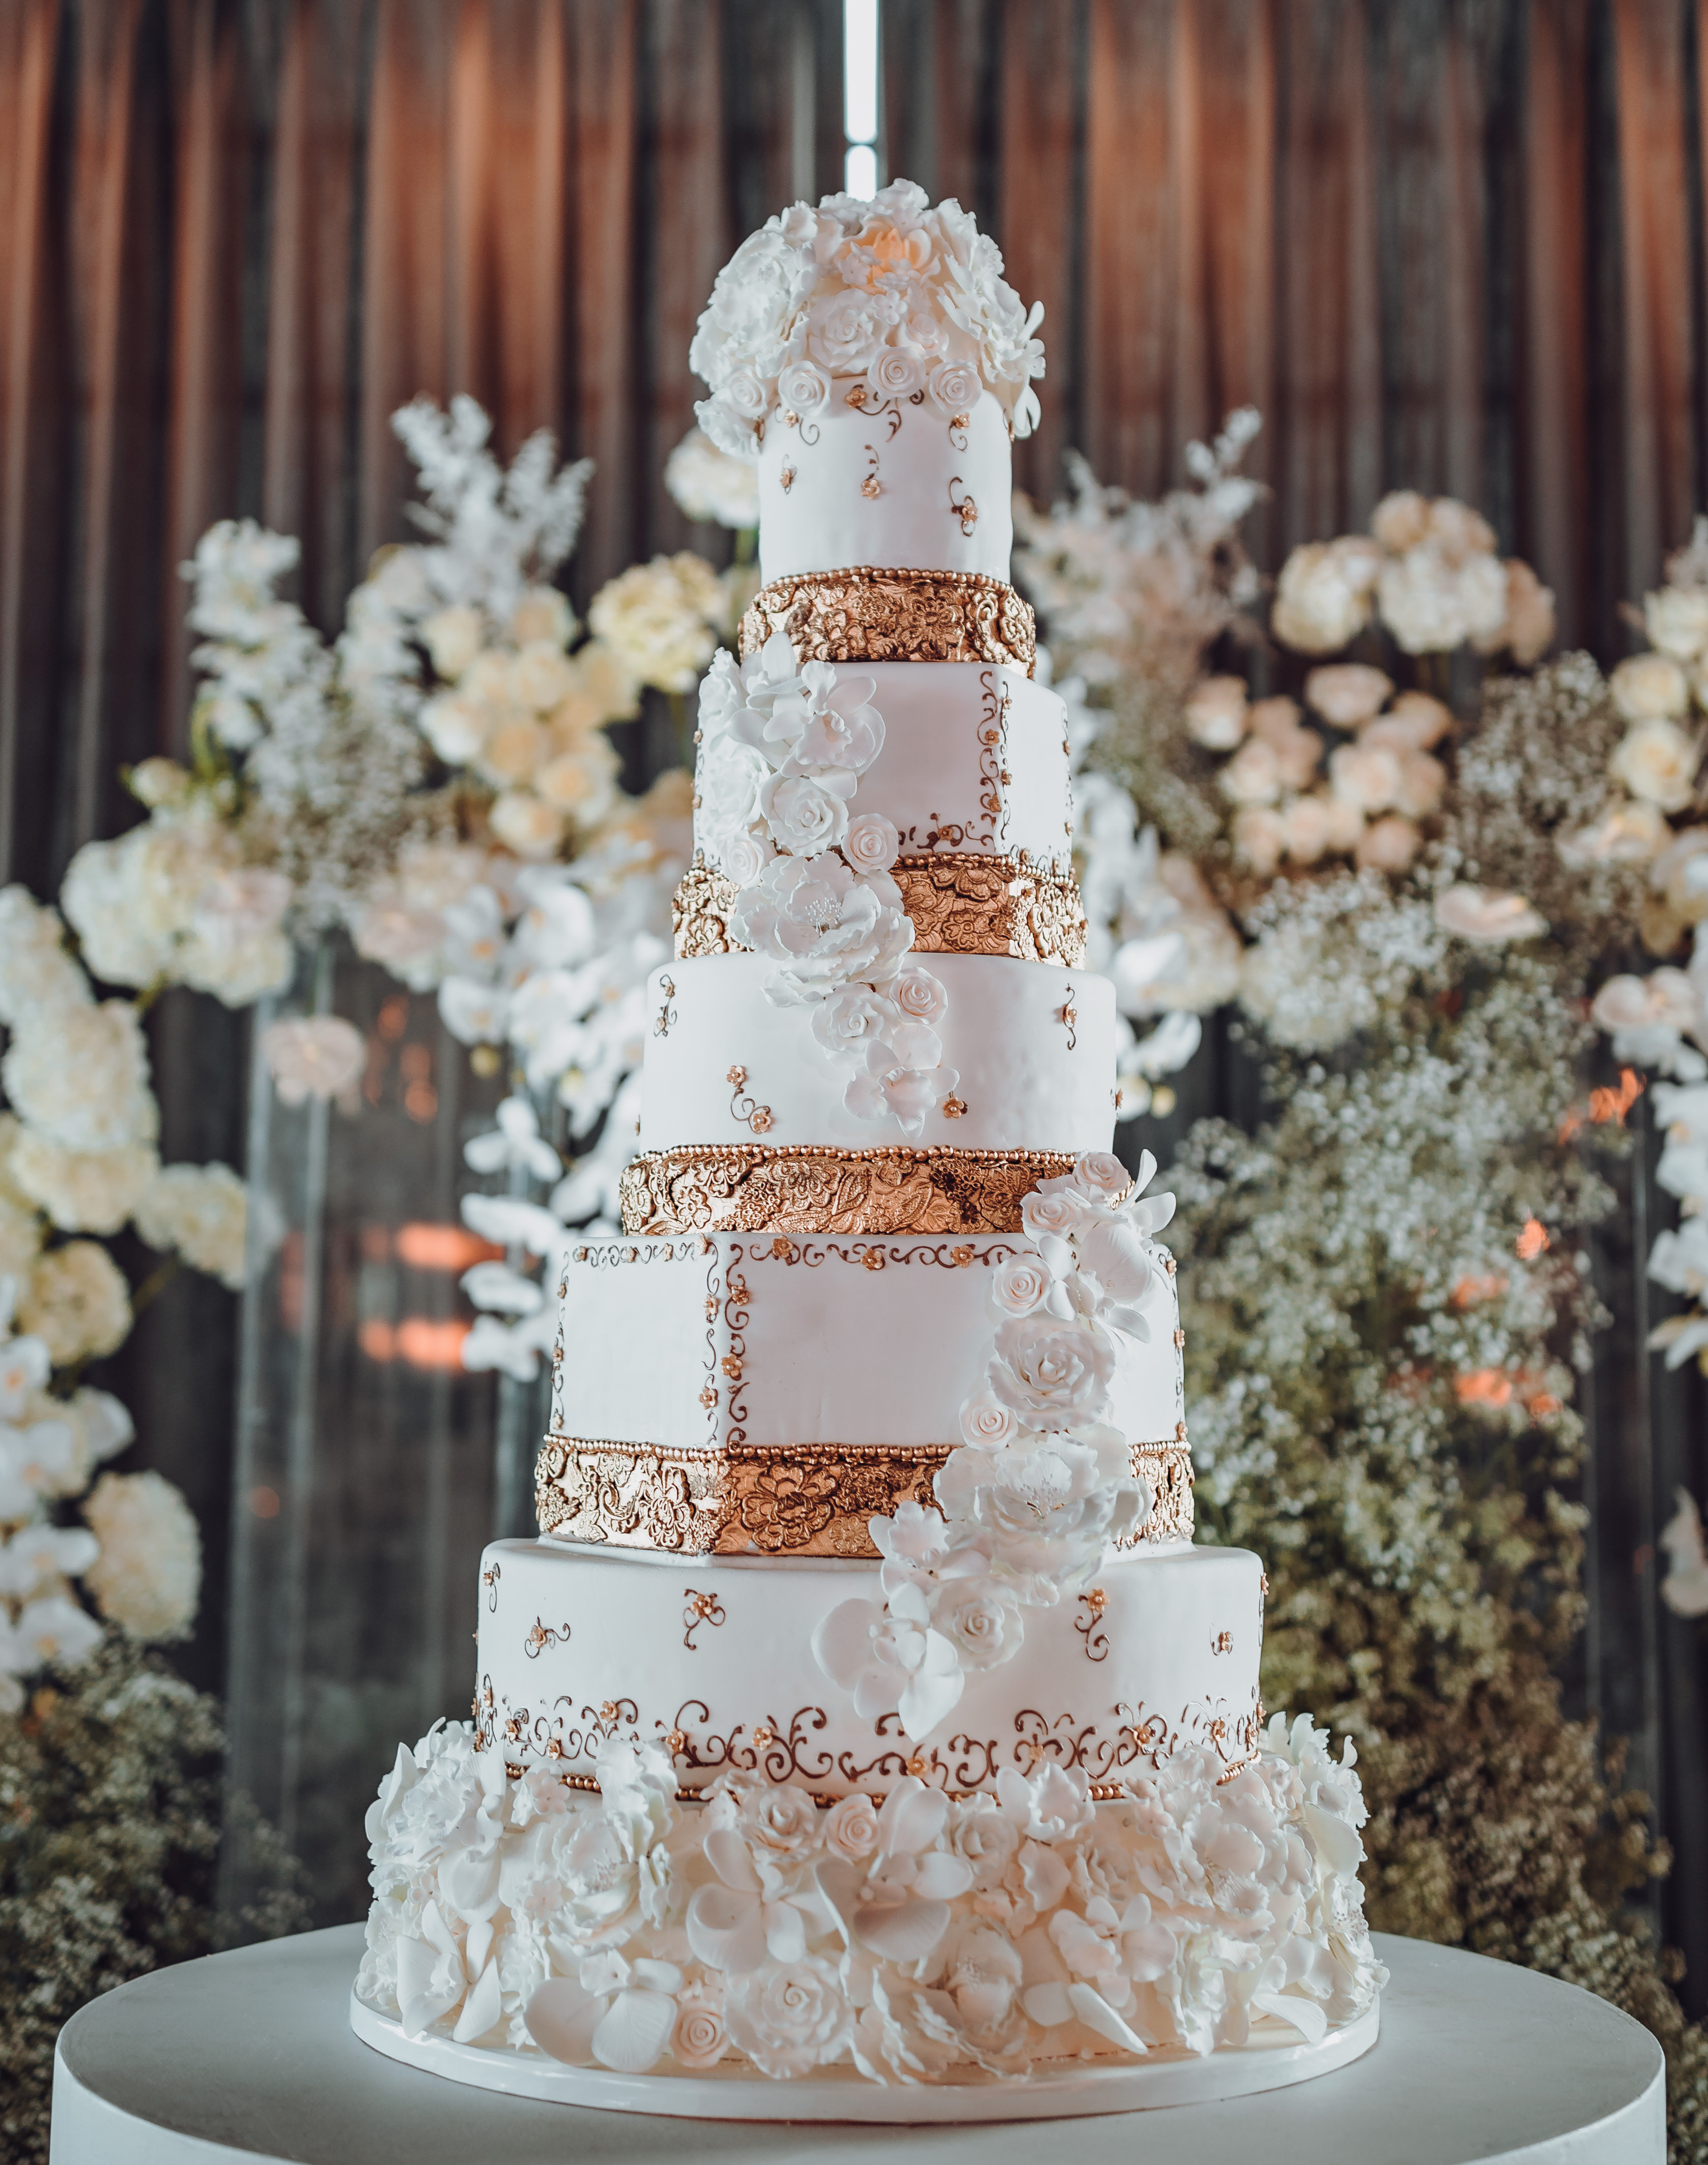 A 6-tier cake with white frosting, gold leaf accents and fondant roses at a real wedding at Houston venue, The Astorian. 